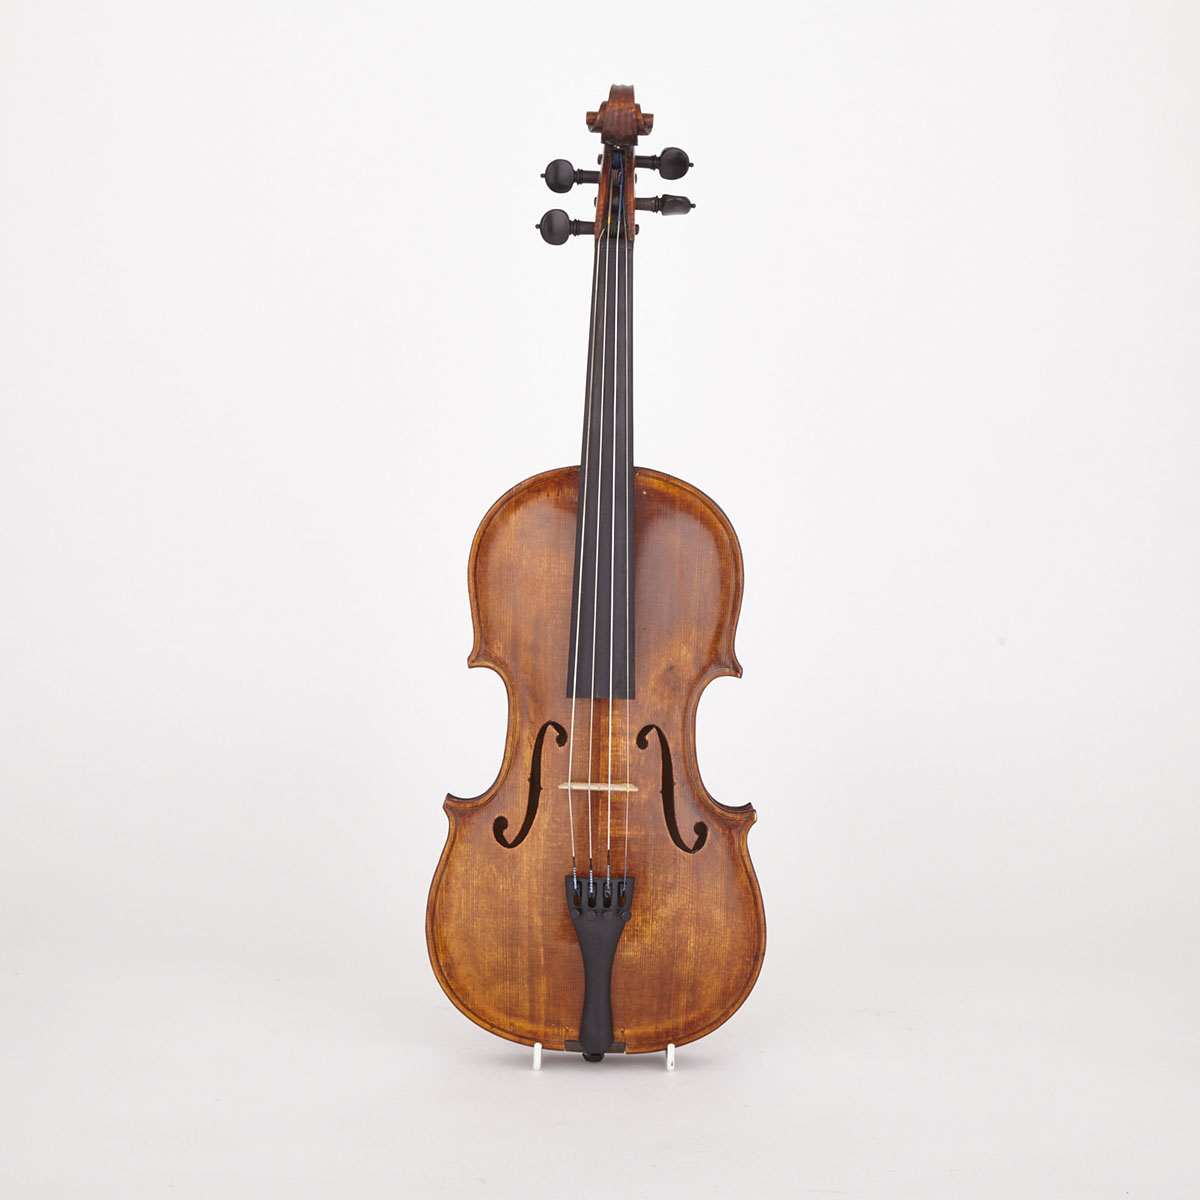 Continental 7/8 Violin, early 20th century